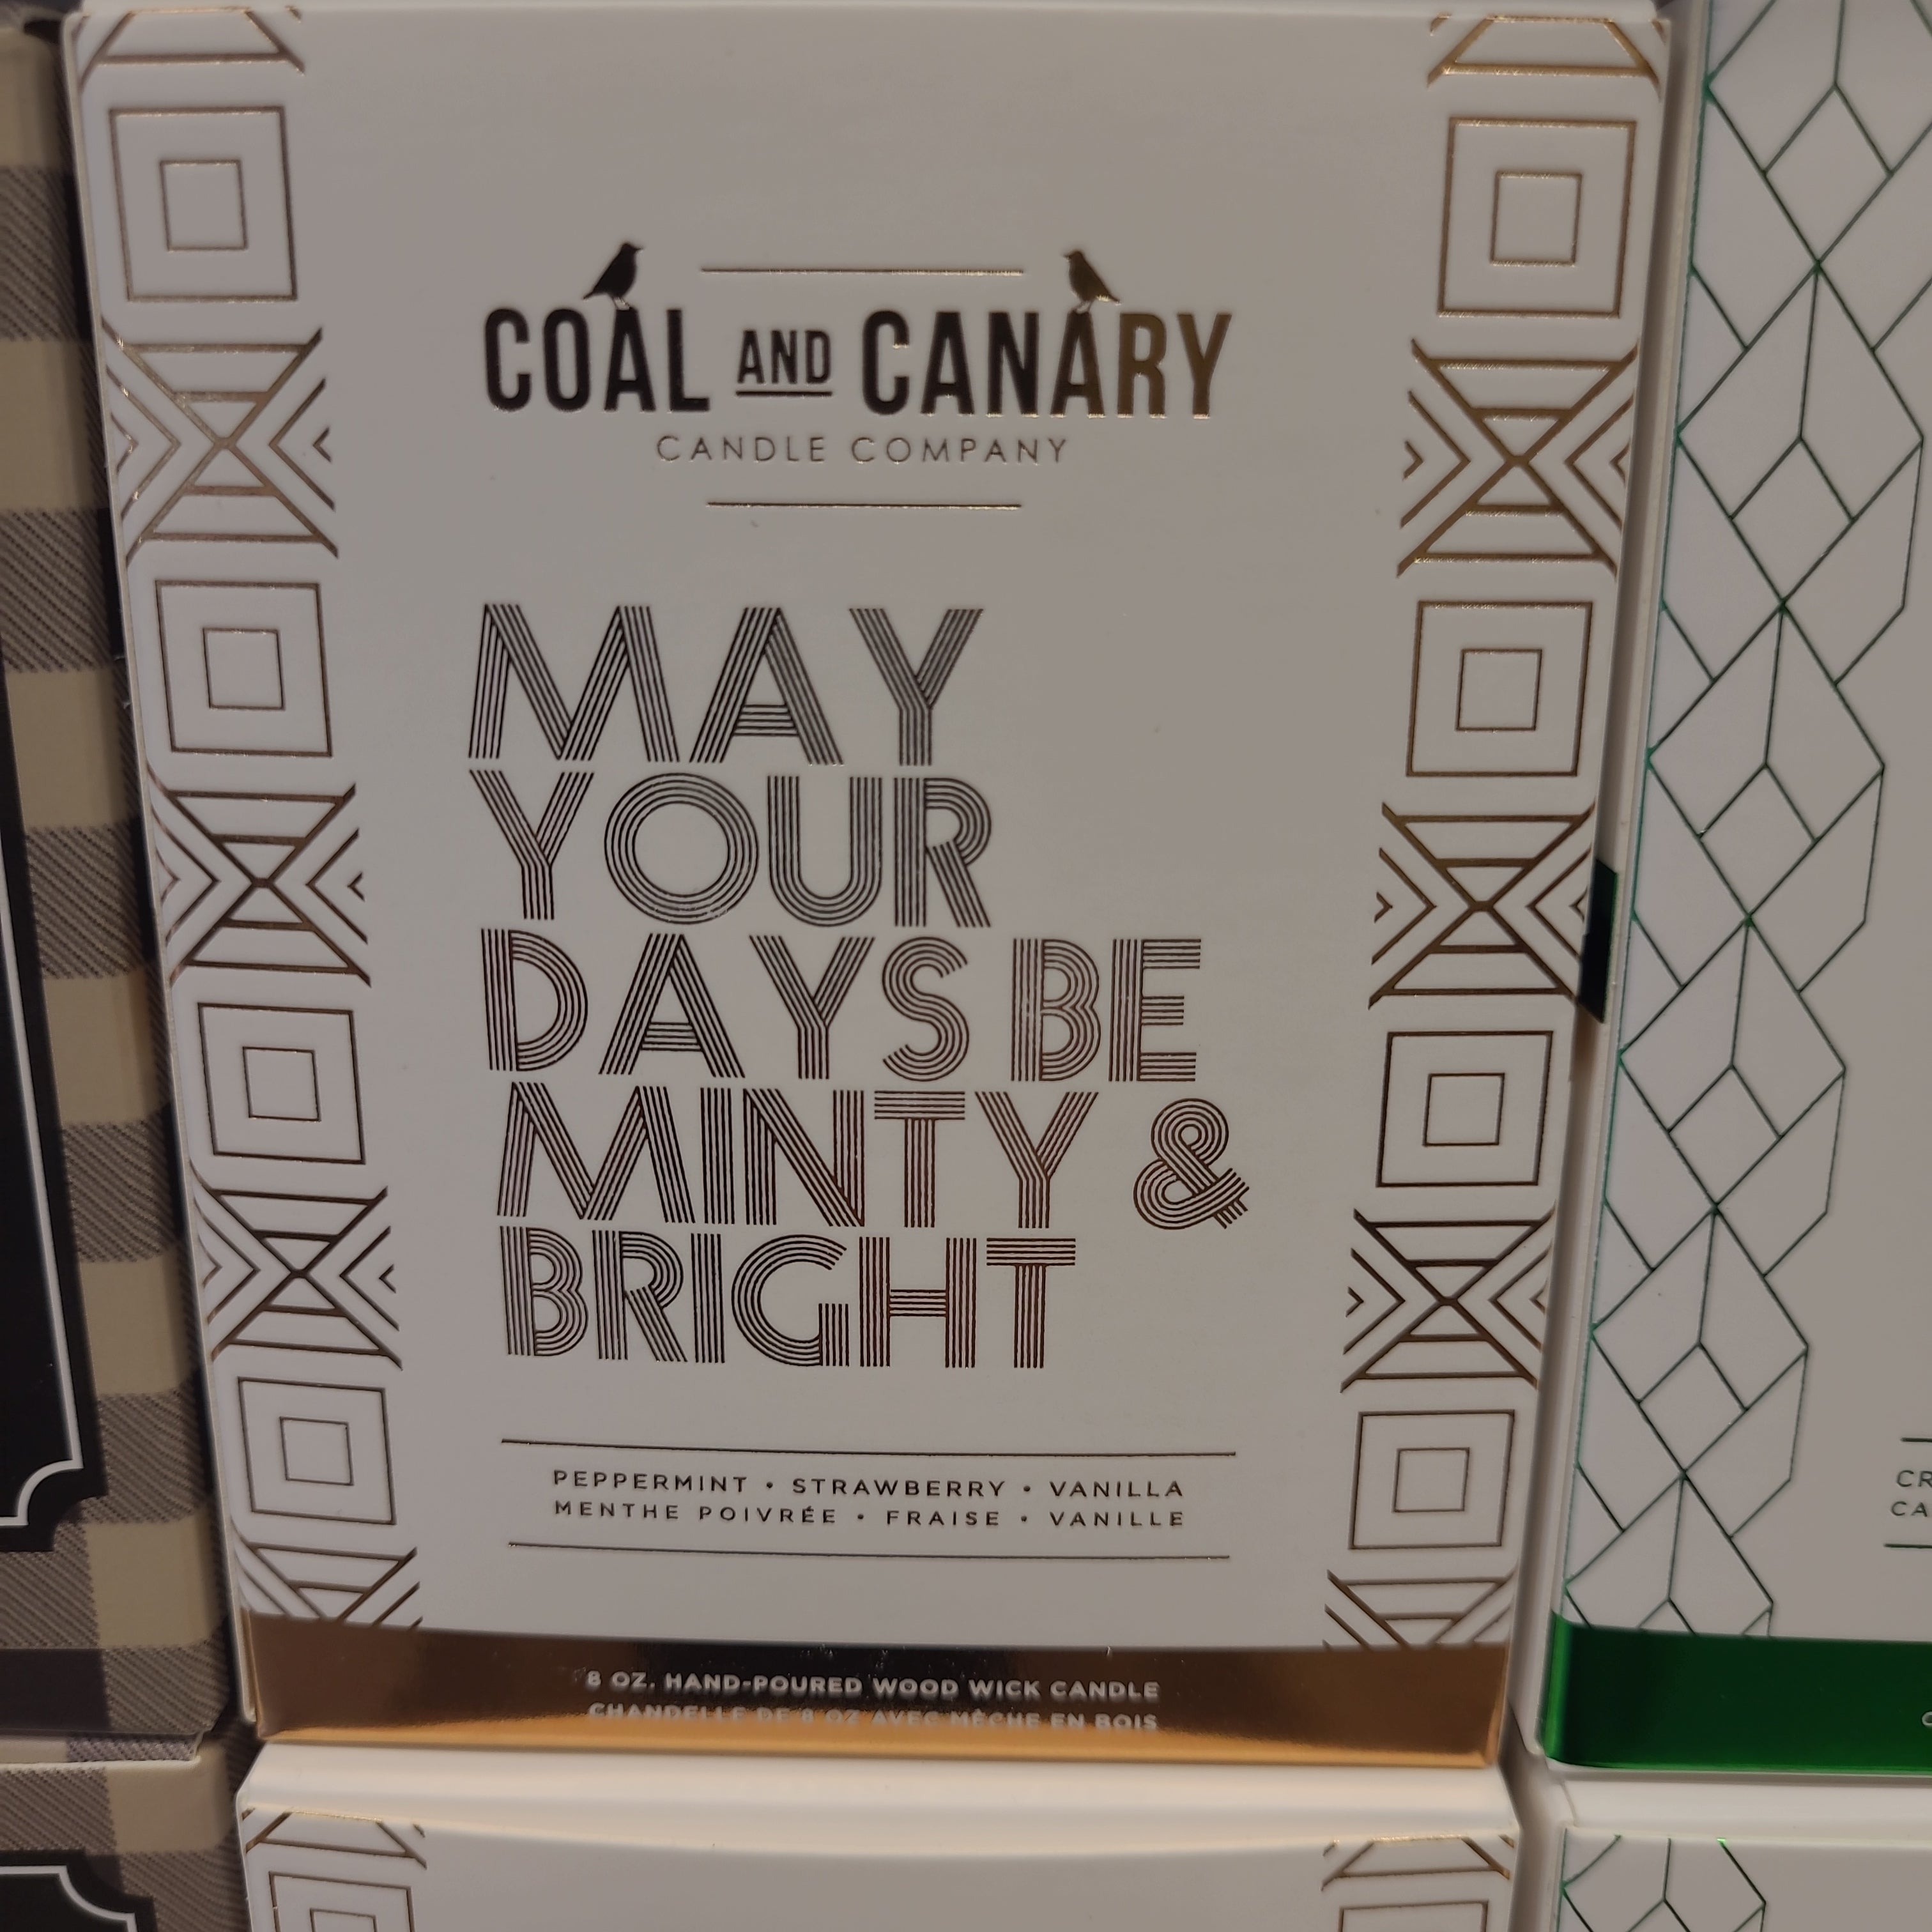 Coal and Canary -May your days be minty and bright